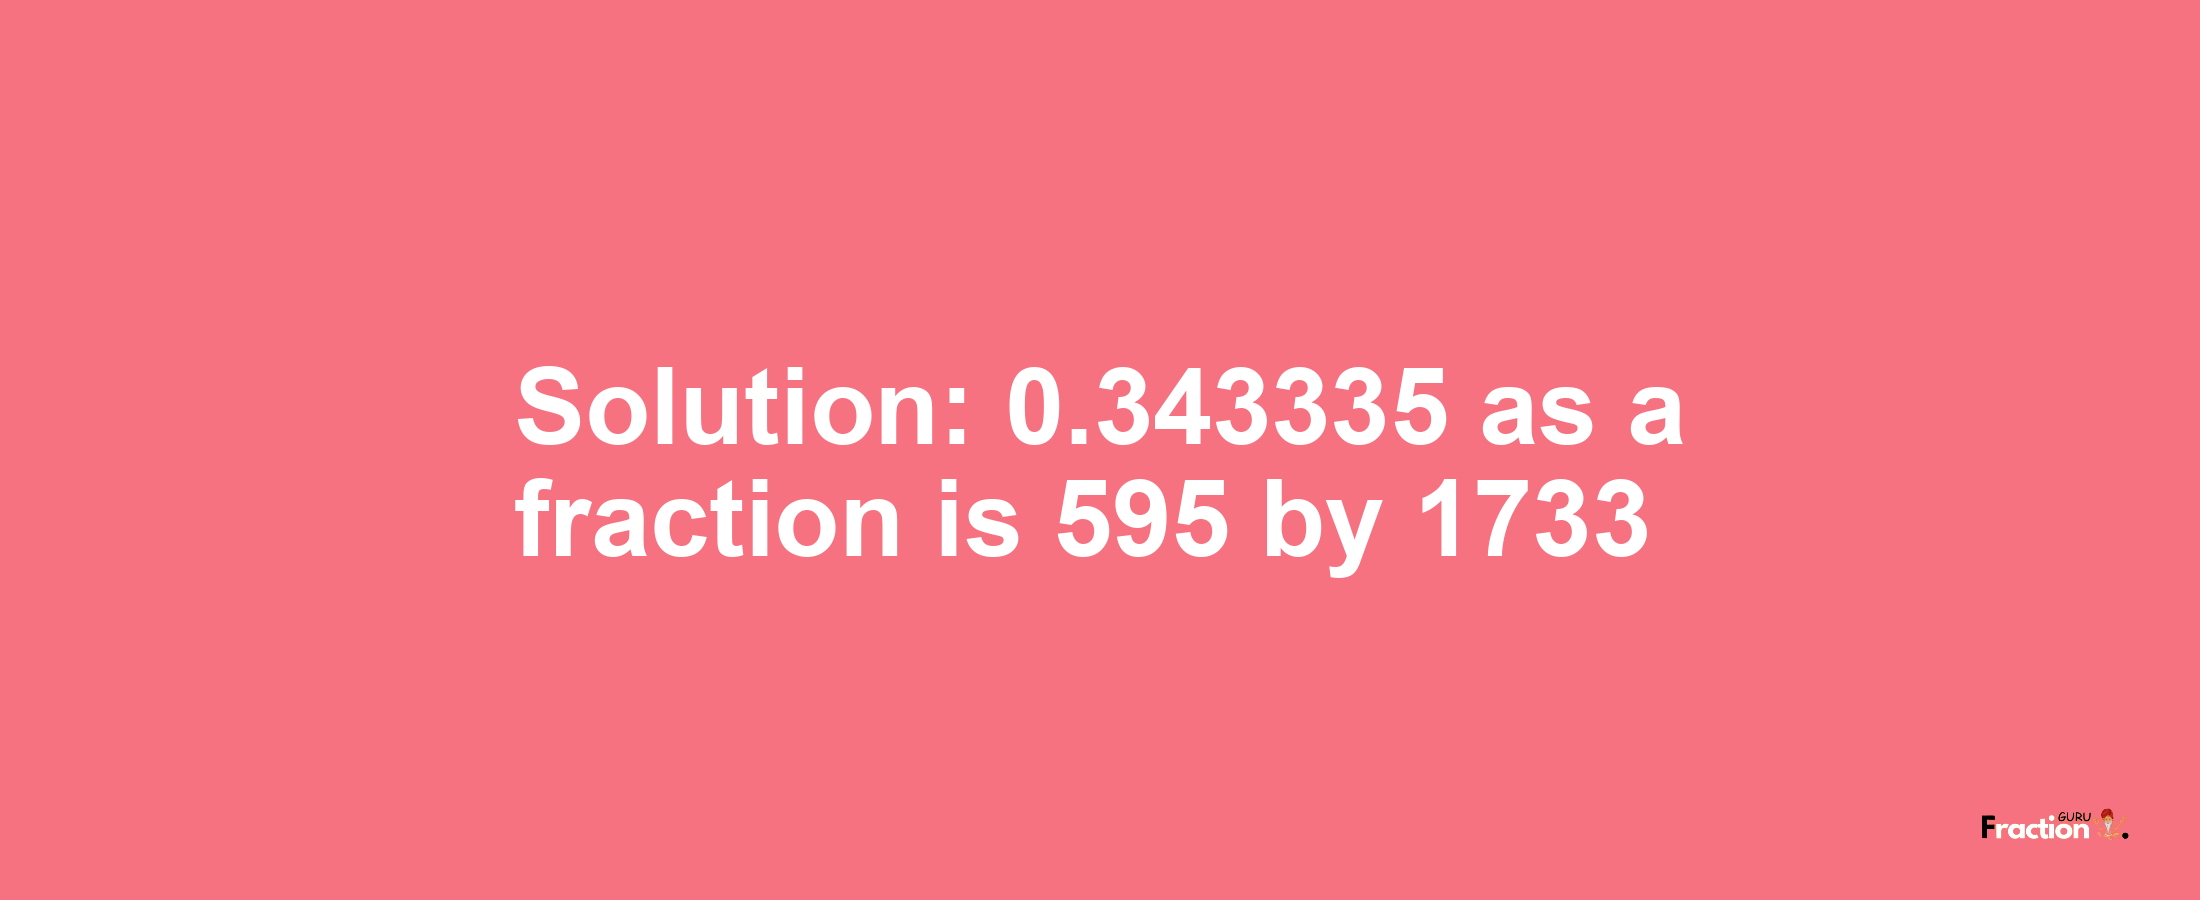 Solution:0.343335 as a fraction is 595/1733